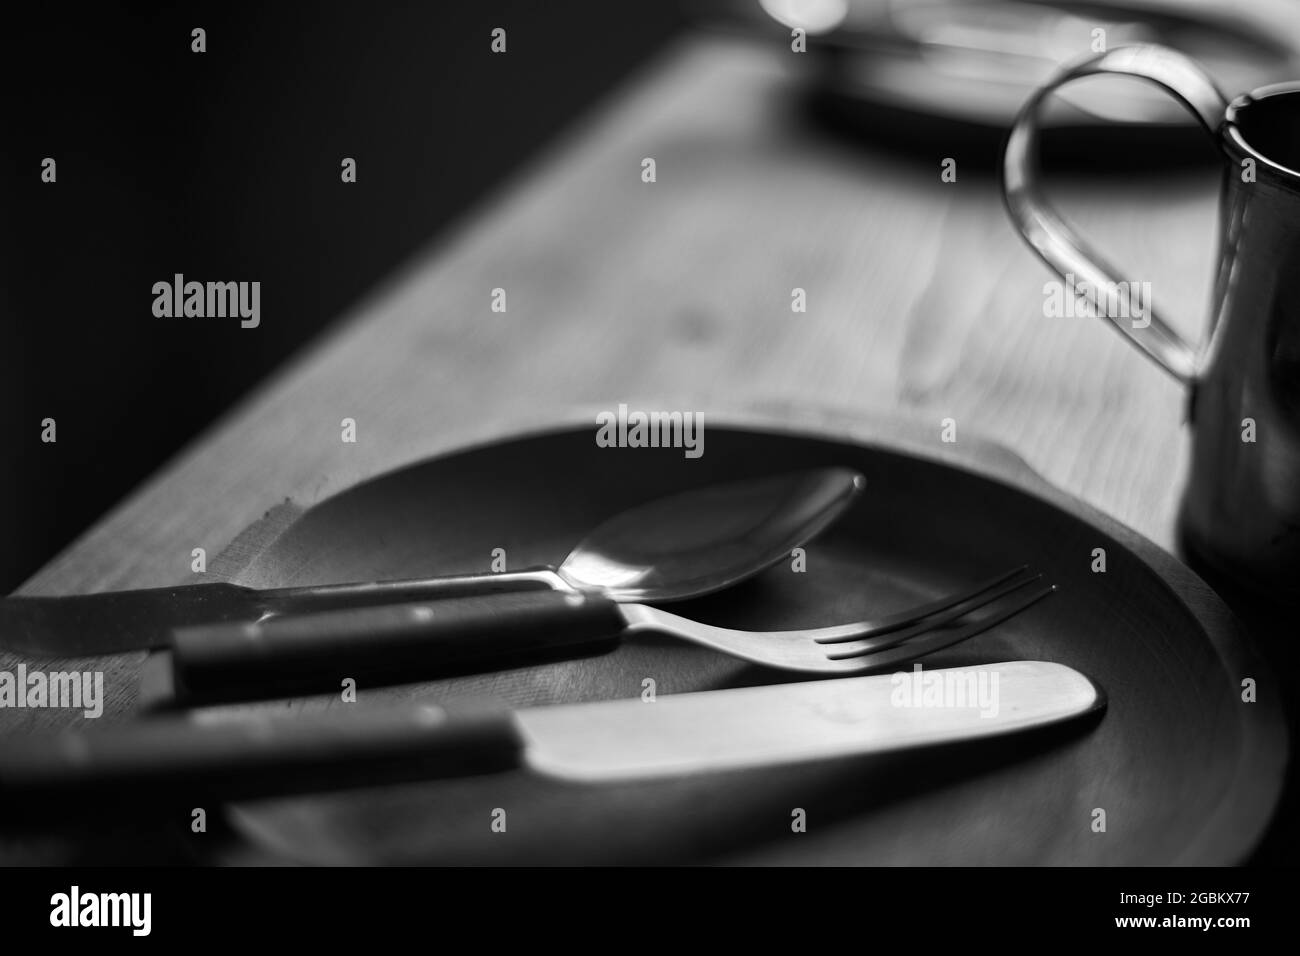 Trio. Spoon, fork and knife in the wooden plate. Defocused black and white background. Close up. Stock Photo